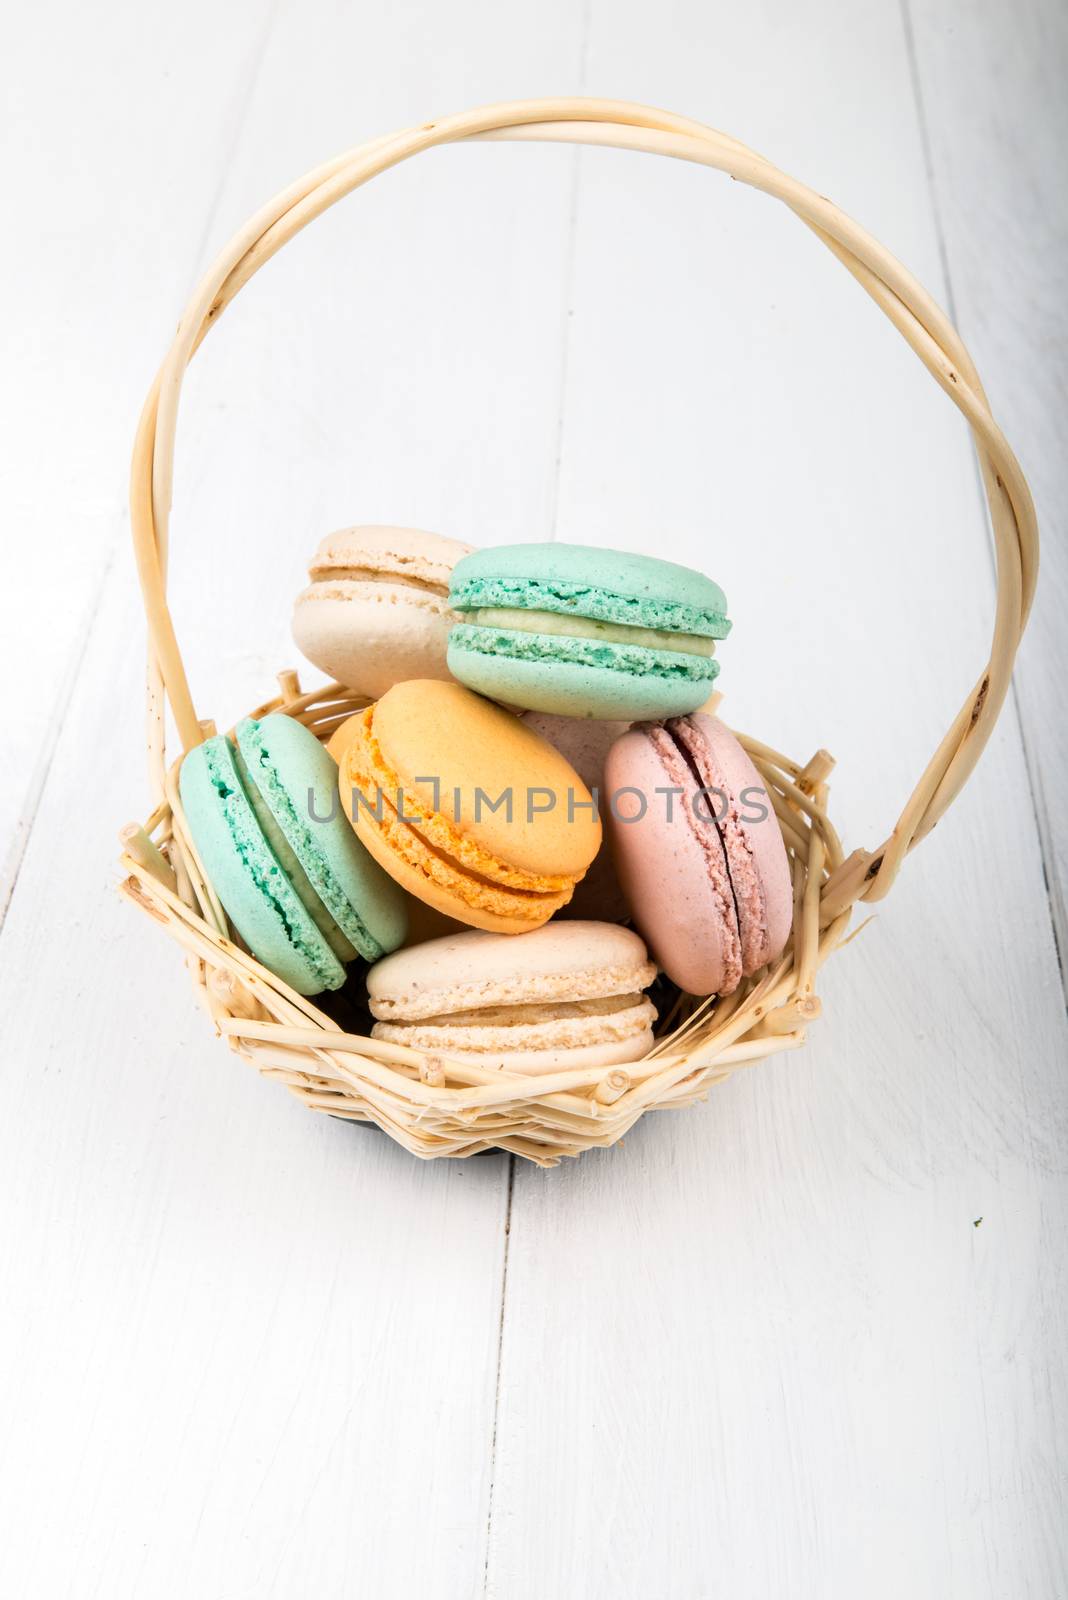 Set of macarons on white wooden table by marius_dragne